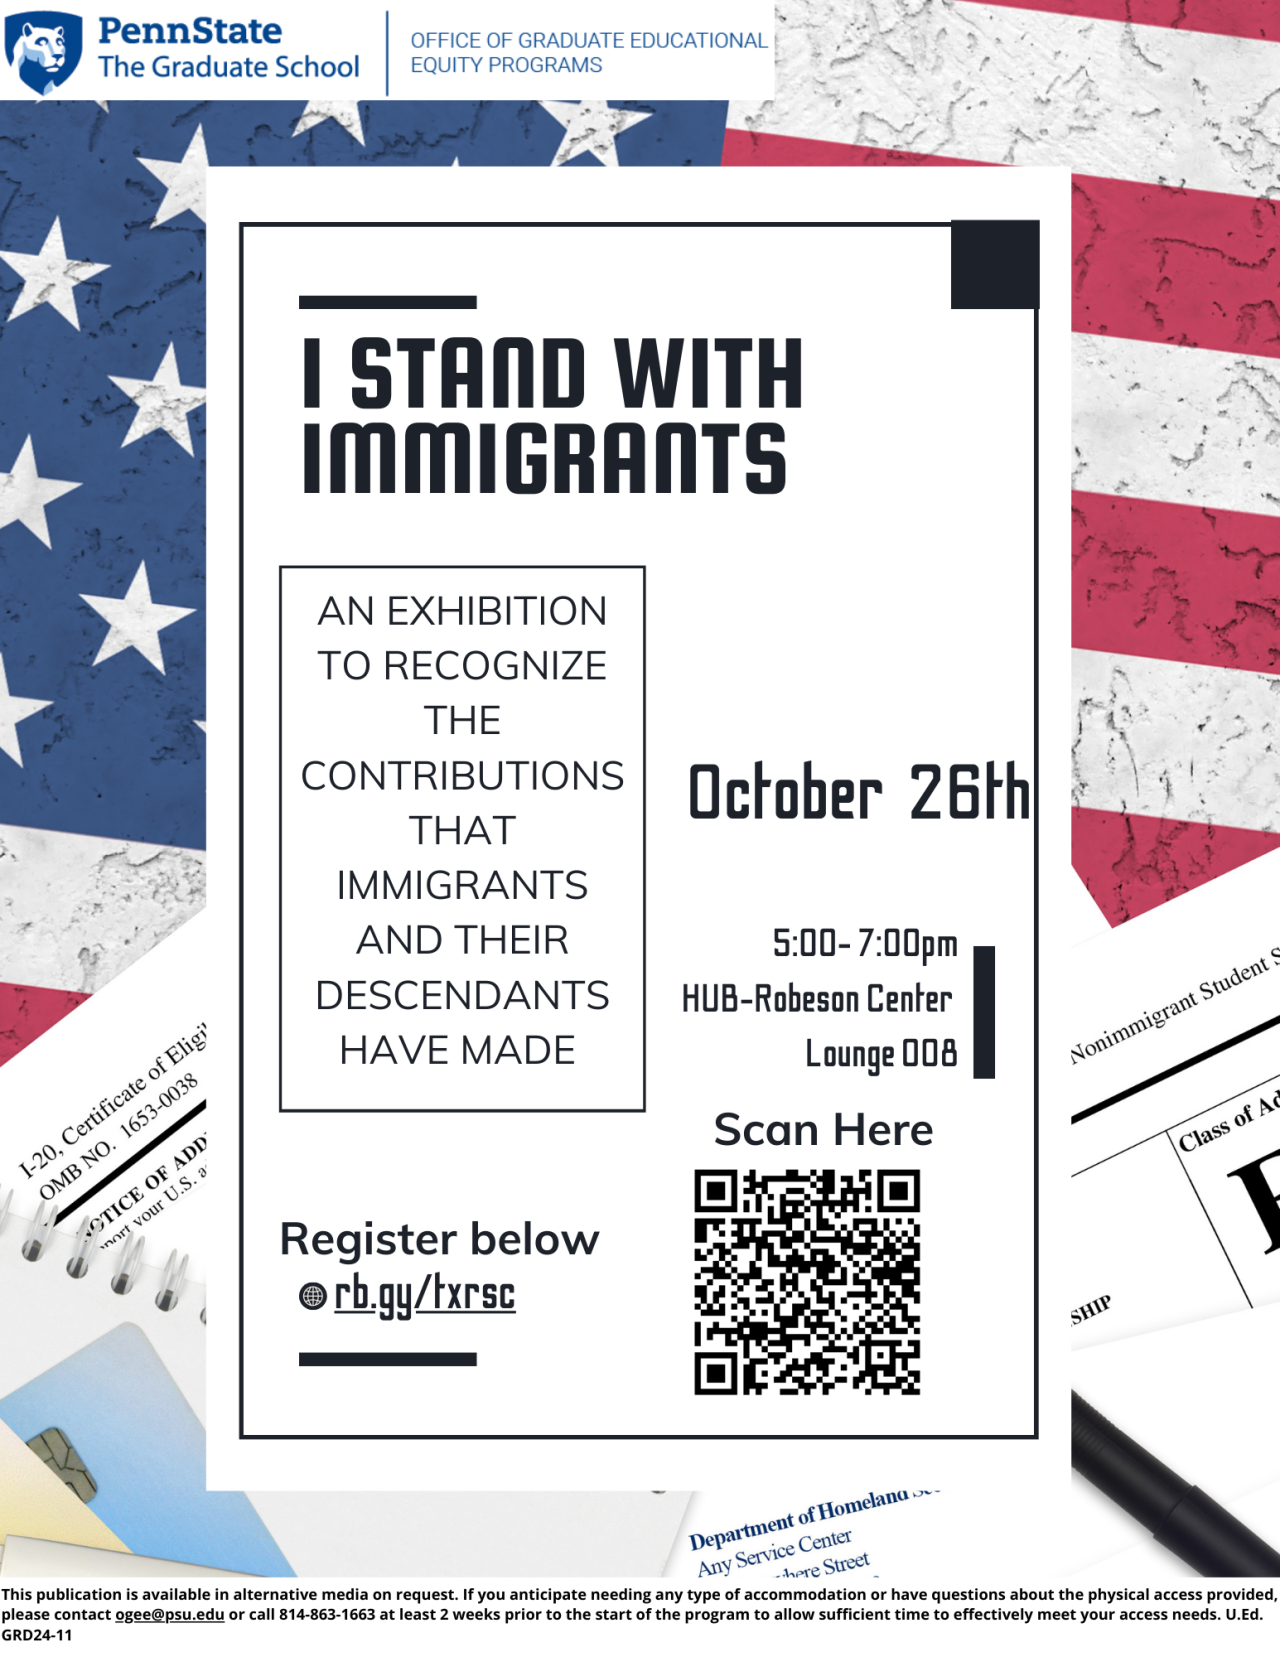 Flyer for I Stand with Immigrants event